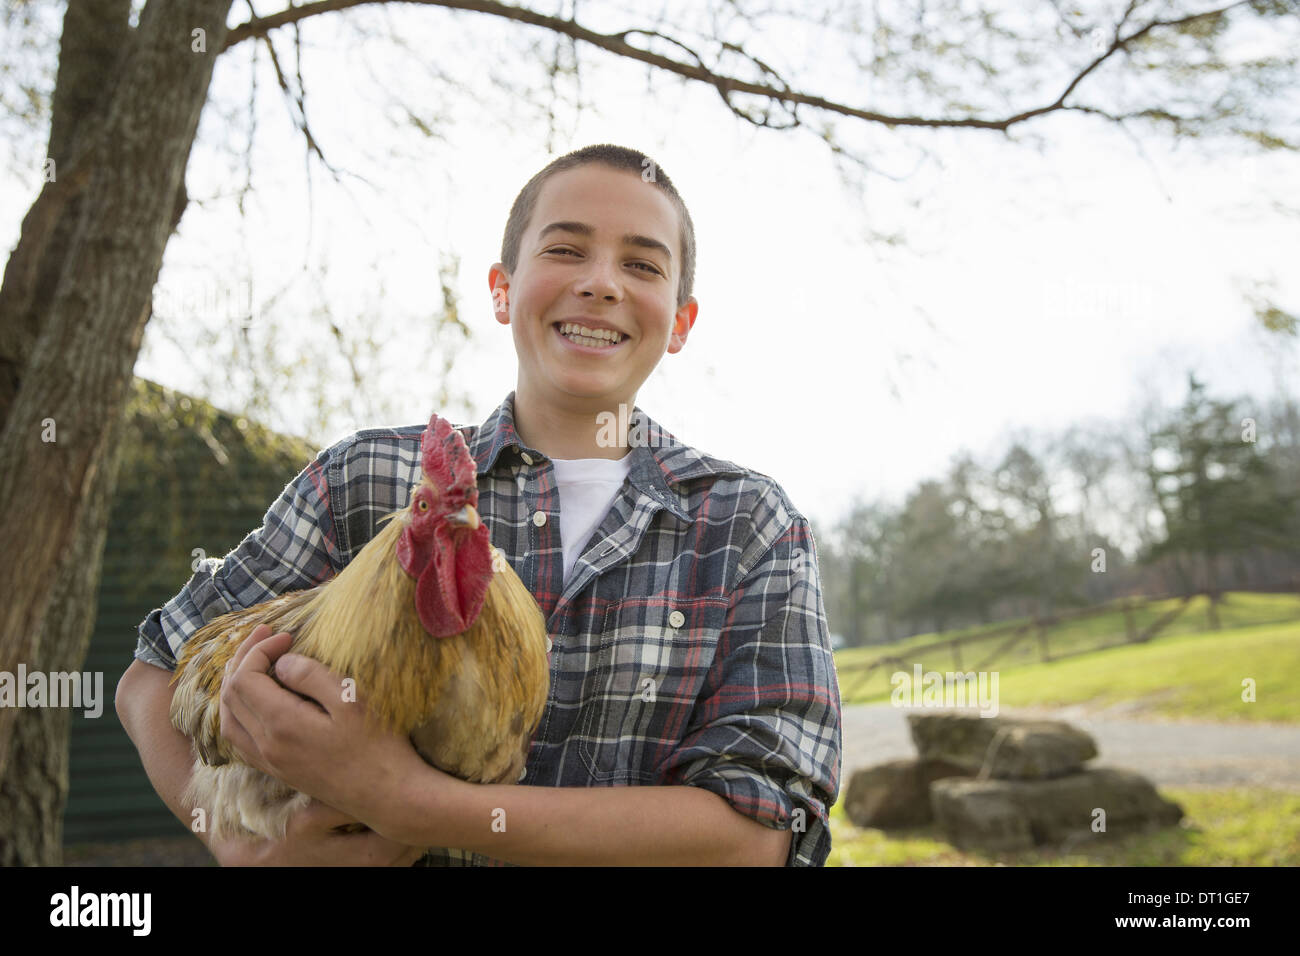 An animal sanctuary A young boy holding a chicken with brown feathers and a red coxcomb Stock Photo